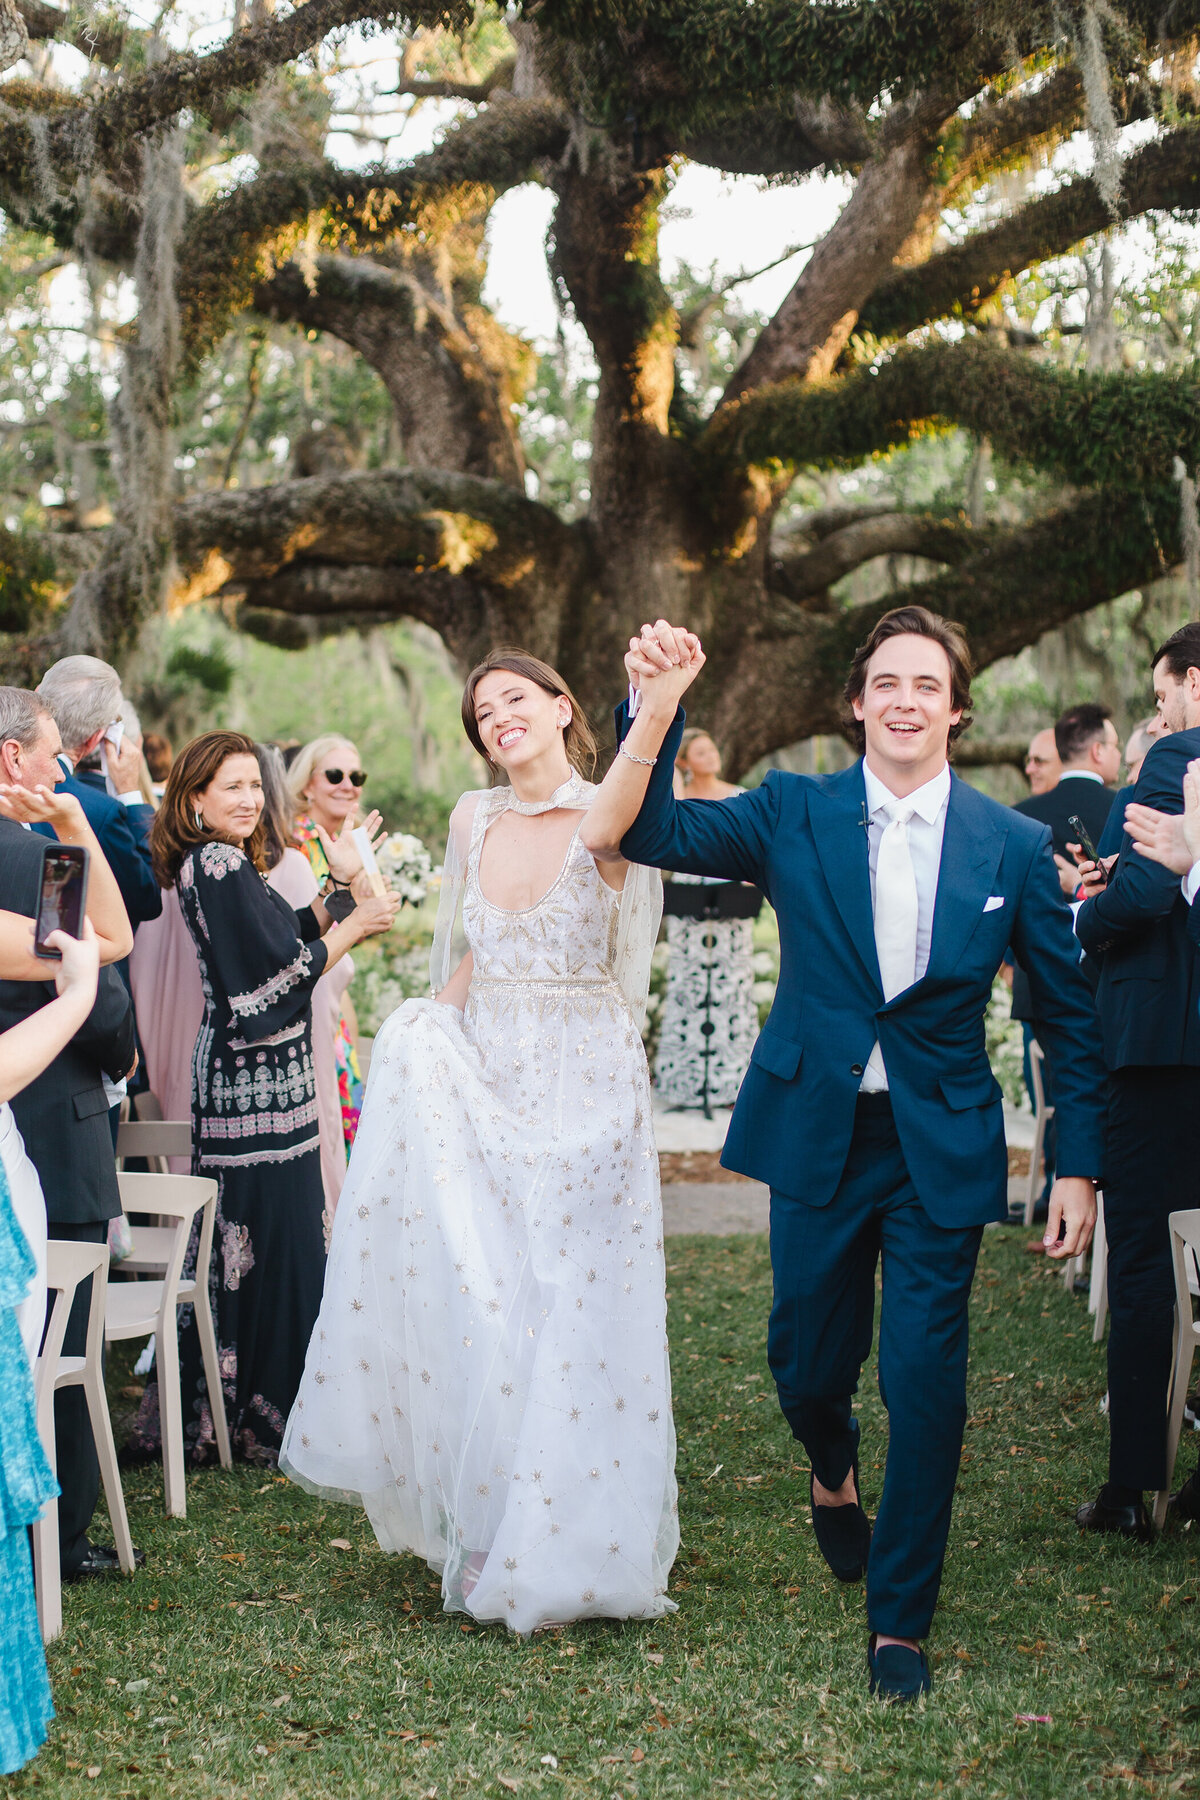 Sarah + George - Wedding Day at New Orleans Museum of Art - Luxury Wedding Weekend by Michelle Norwood Events - 17